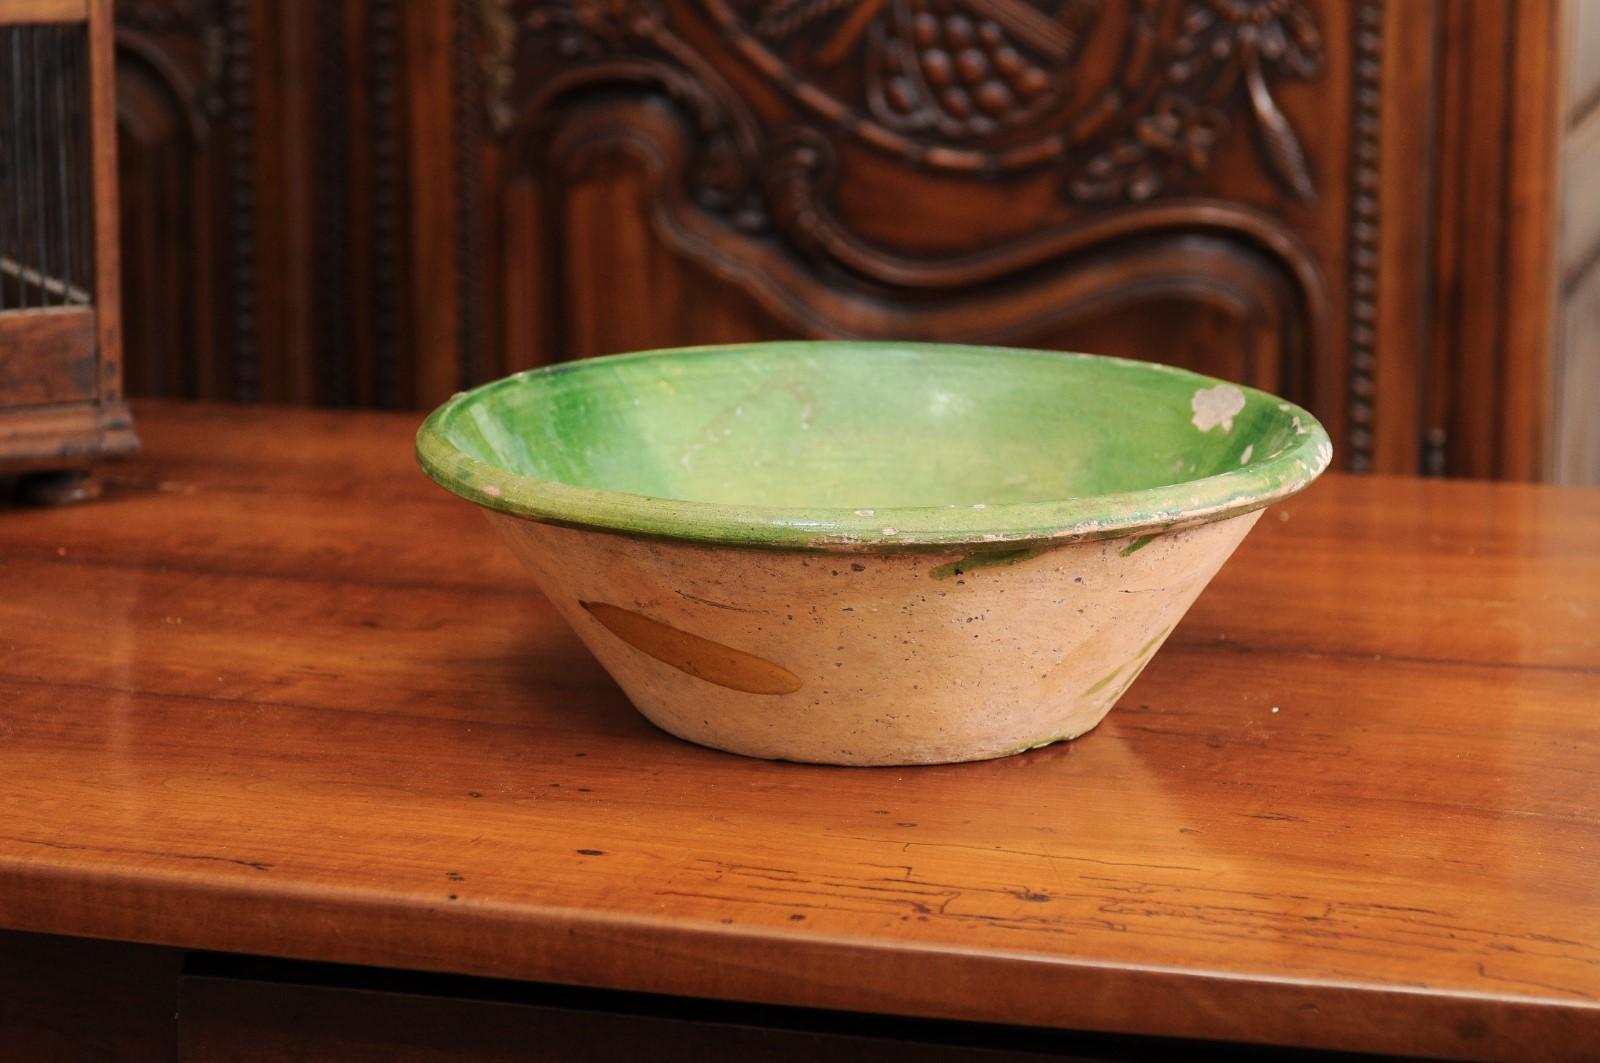 A French Provincial green glazed pottery bowl from the mid-19th century, with unfinished belly. Created in France during the reign of Emperor Napoléon III, this pottery bowl features a circular body, boasting a green glaze on the interior, while the